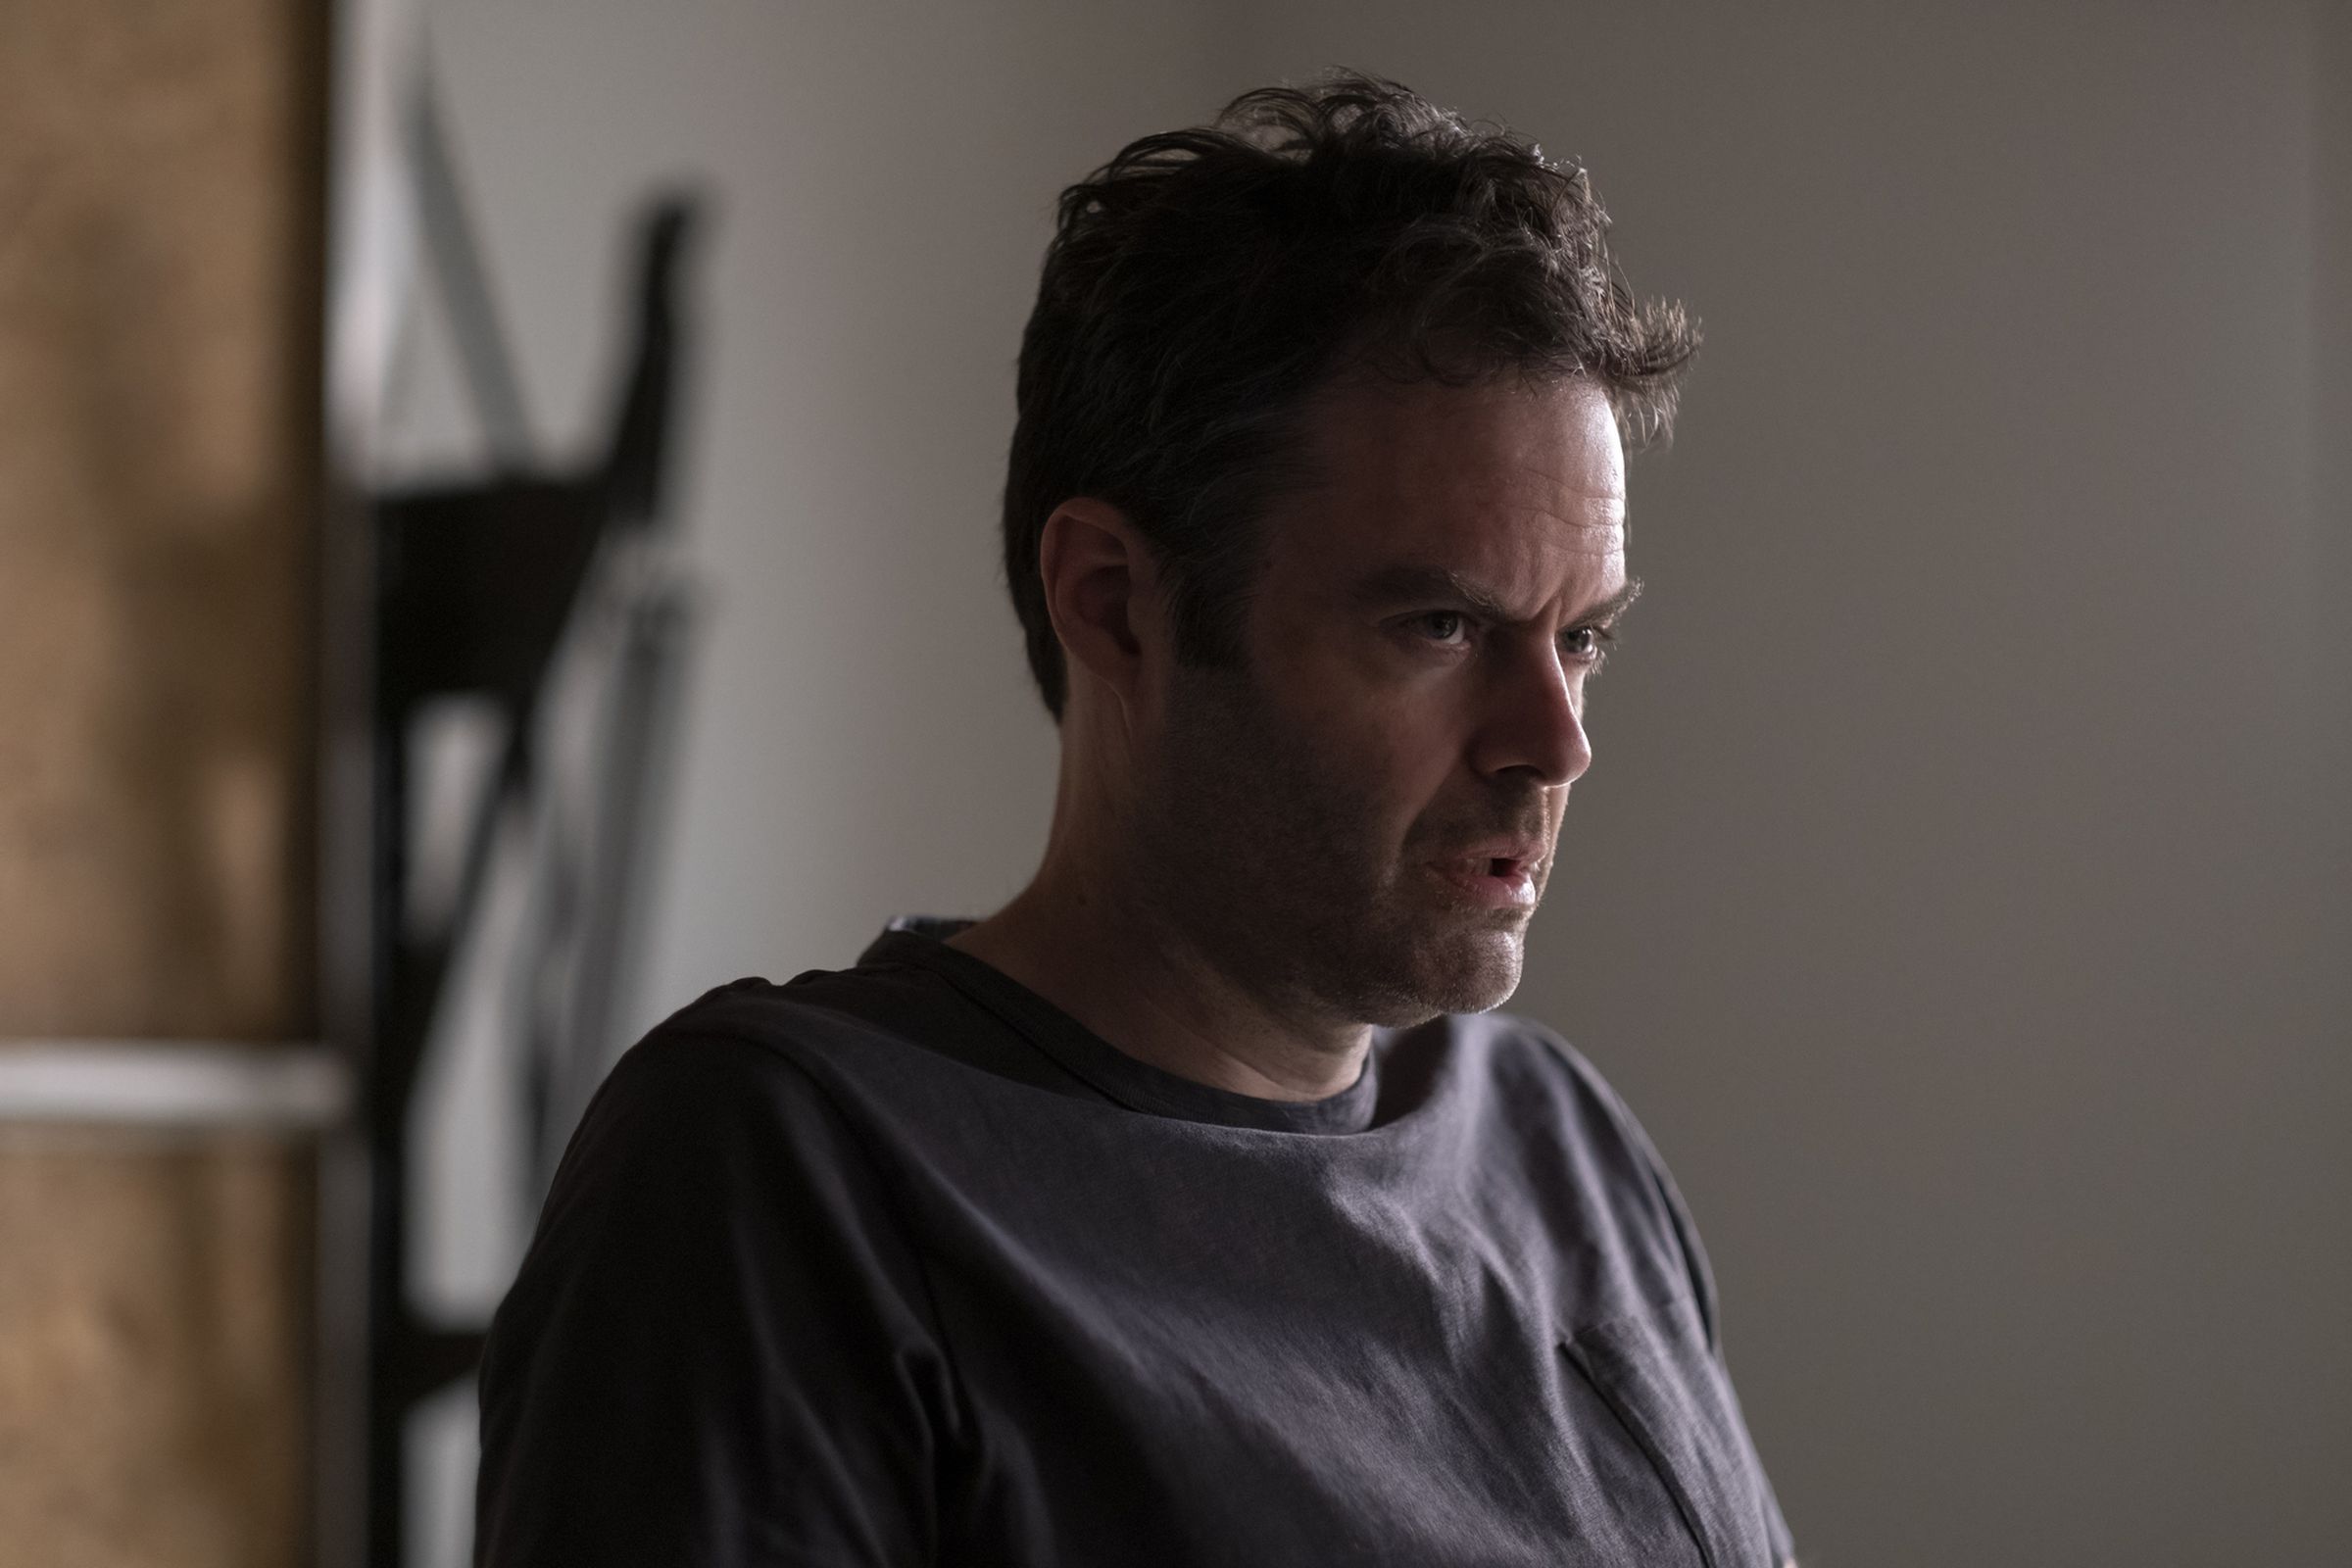 Screenshot from Max show Barry featuring Bill Hader as the character Barry a caucasian man with a grim expression wearing a fadded blue t-shirt.